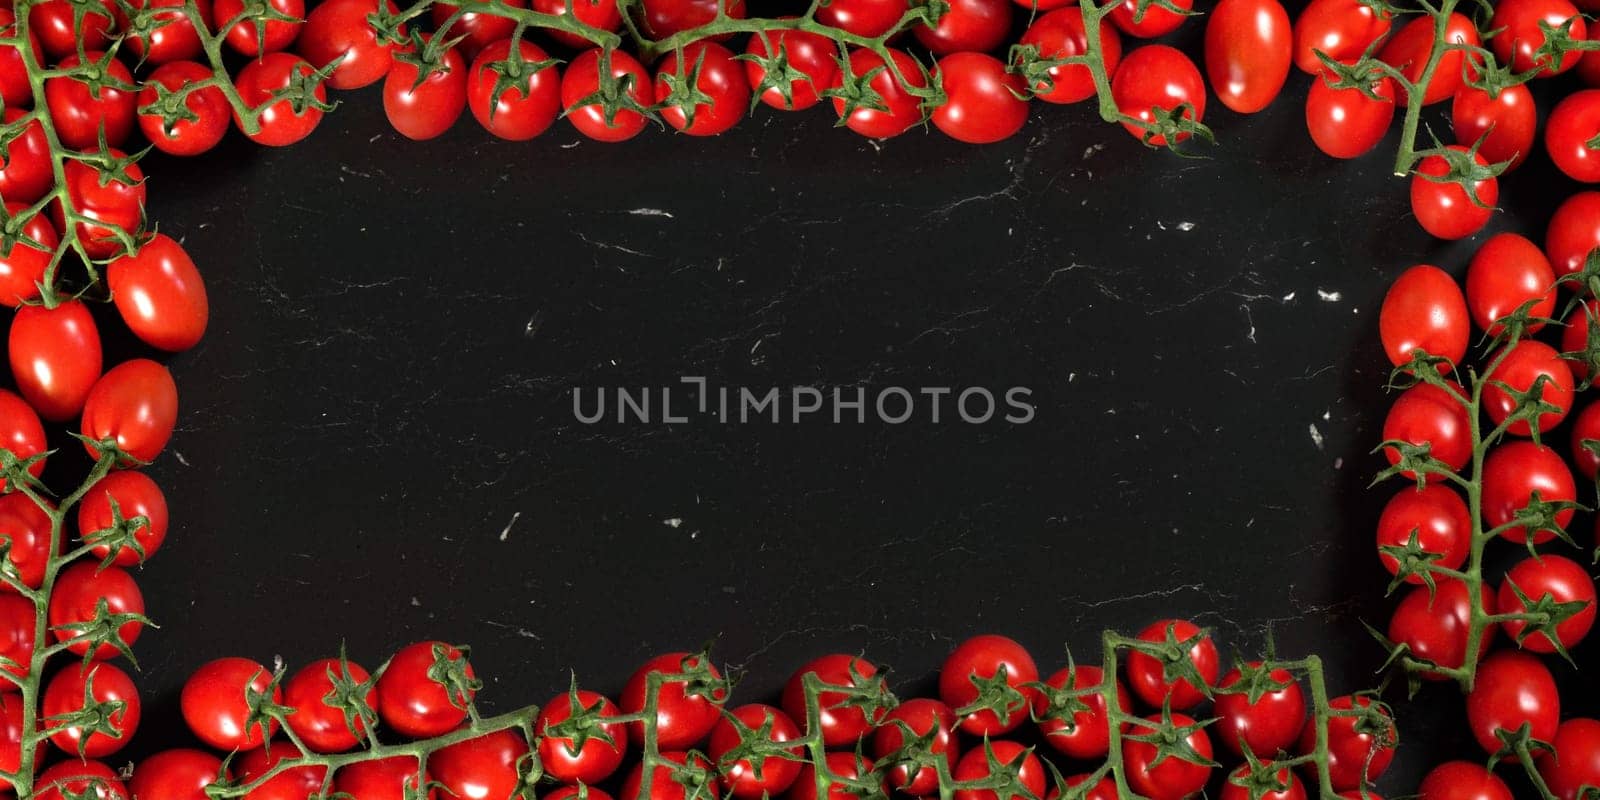 Border frame made out of tomatoes with green vine leaves, empty space left for text on black marble like board.